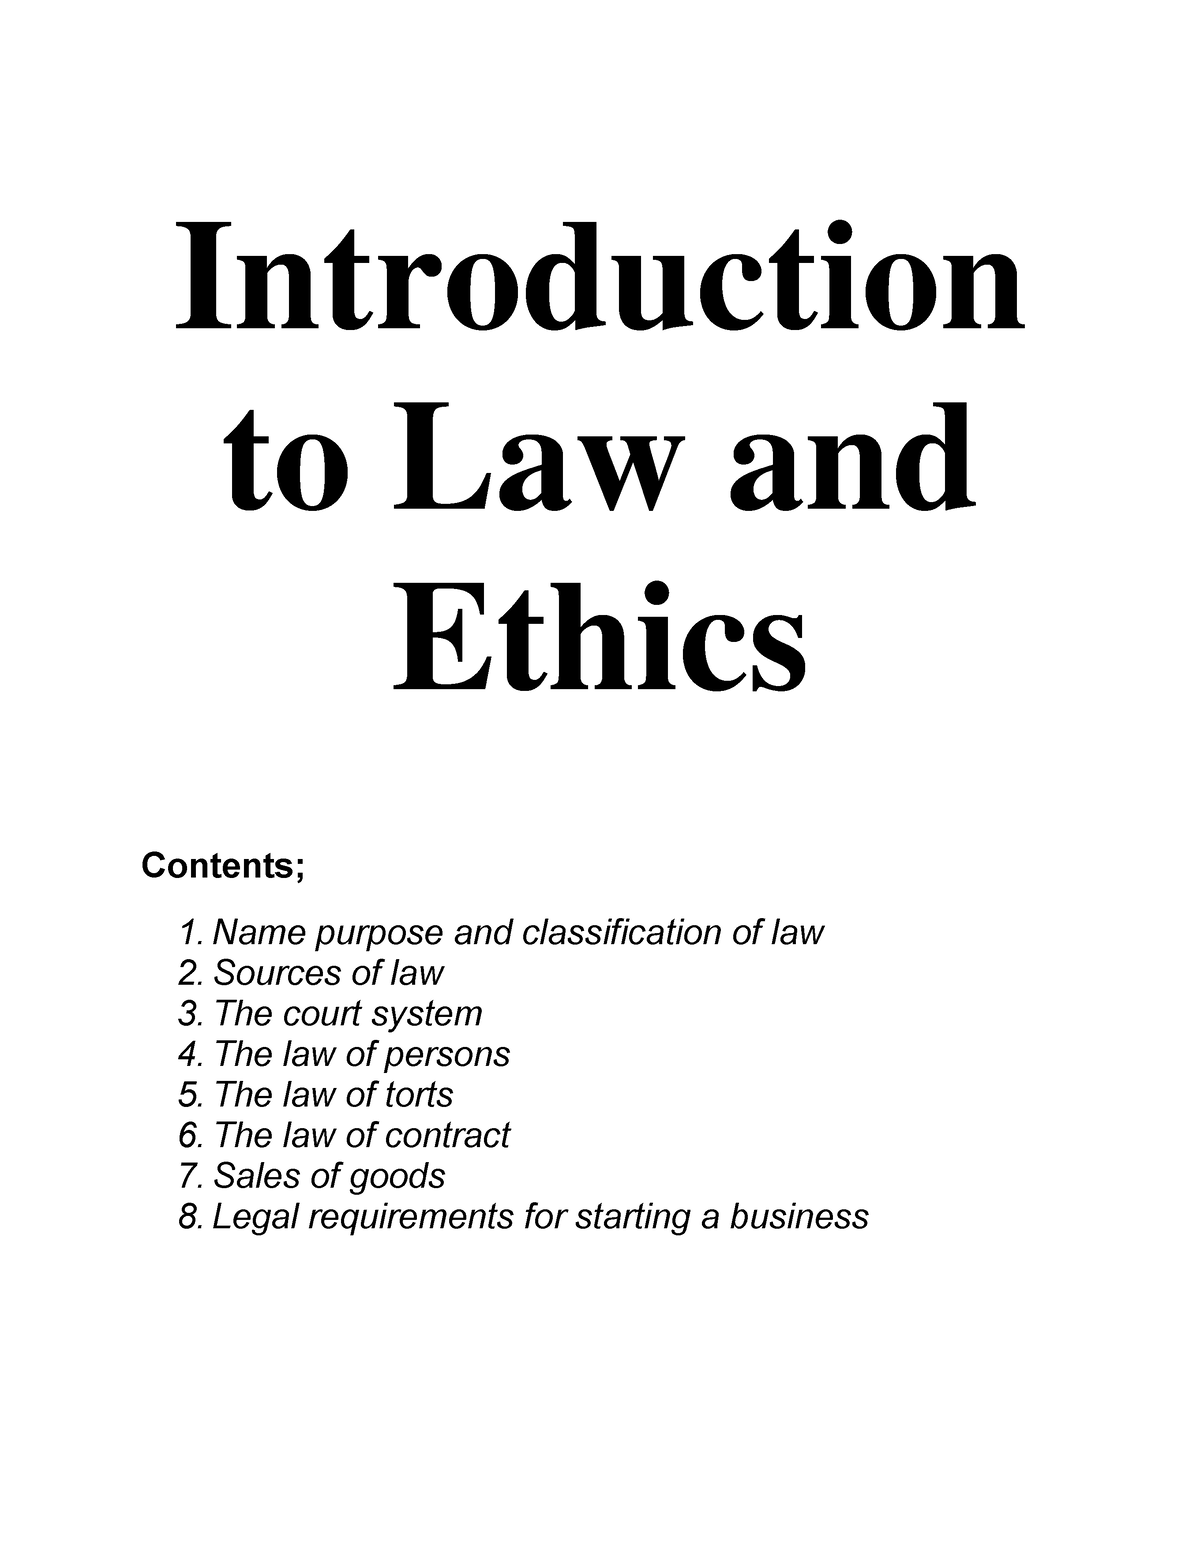 law and ethics assignments